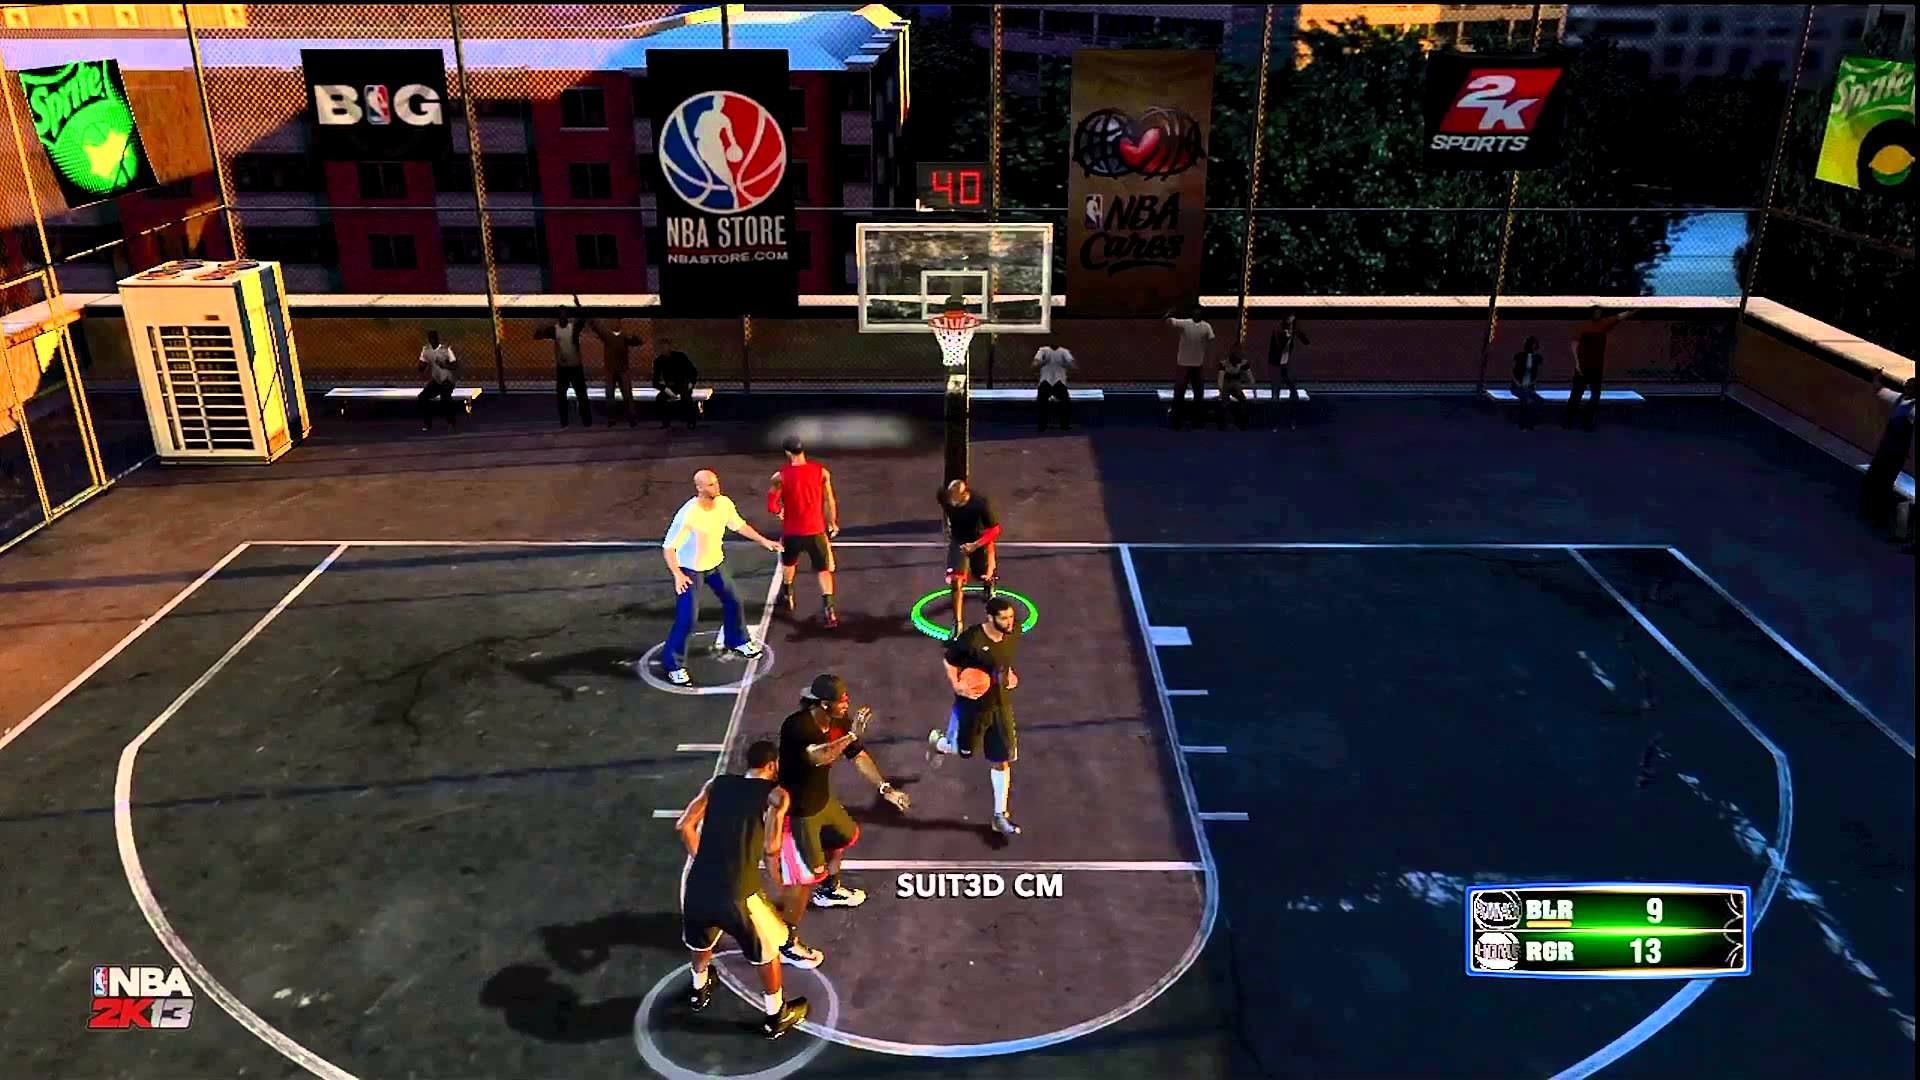 NBA 2K13 3v3 Blacktop Featuring the MoneyTeam – Sub Session Featuring K.Spade – YouTube